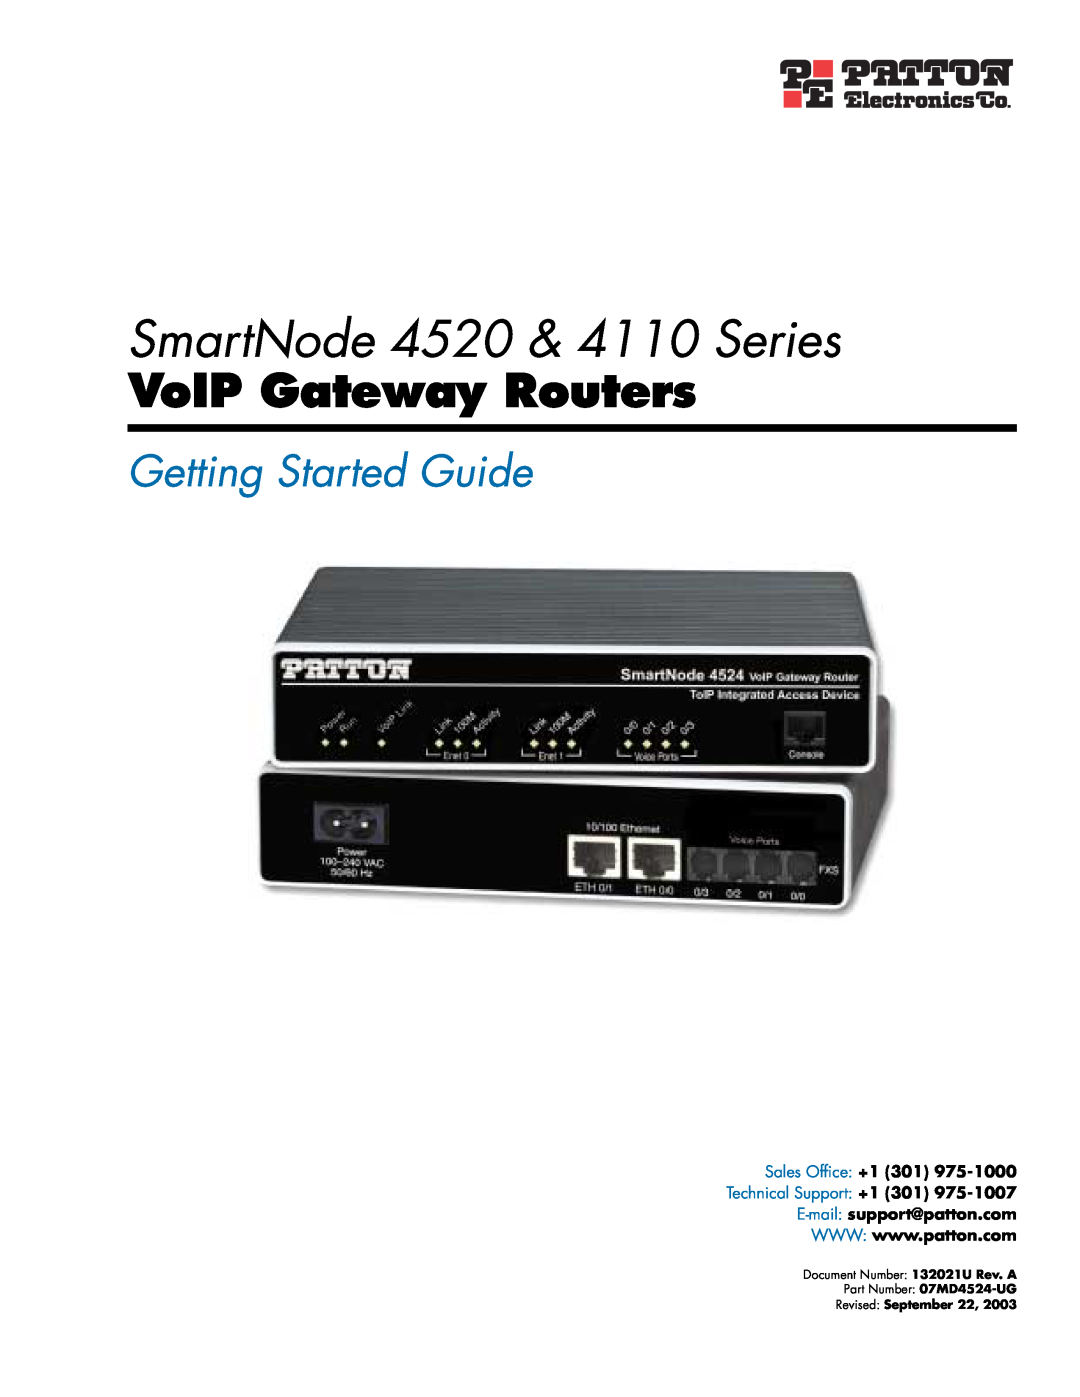 Patton electronic manual SmartNode 4520 & 4110 Series, VoIP Gateway Routers, Getting Started Guide 